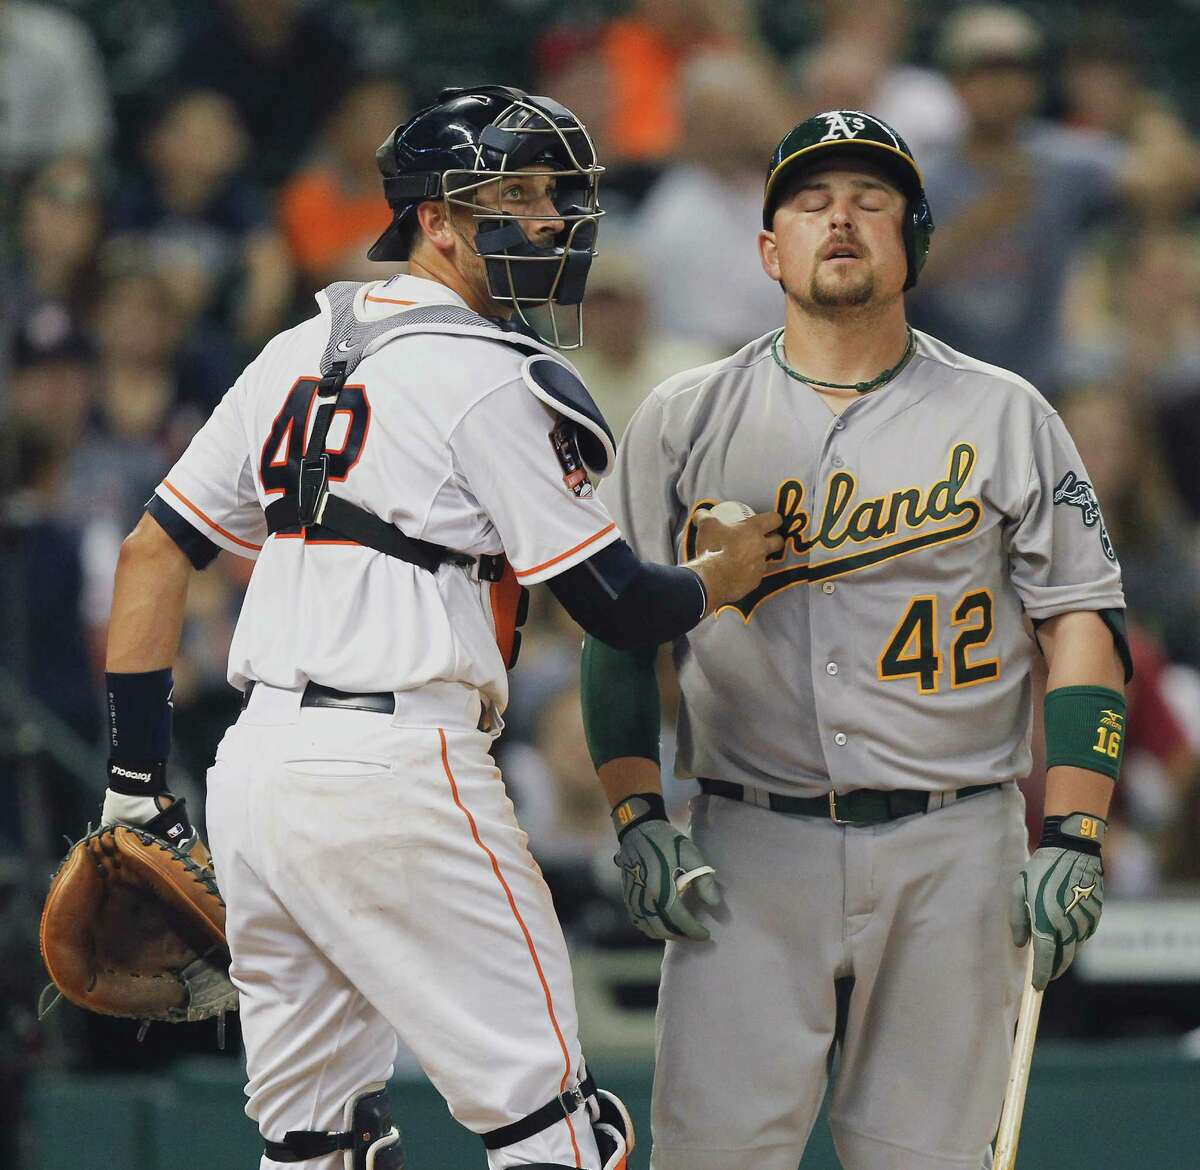 HOUSTON, TX - APRIL 15: Billy Butler of the Oakland Athletics reacts as Jason Castro of the Houston Astros tags him out on an appeal to first base umpire Mike Everitt in the eighth inning at Minute Maid Park on April 15, 2015 in Houston, Texas. All Major League Baseball players are wearing #42 today in honor of Jackie Robinson Day. (Photo by Bob Levey/Getty Images)